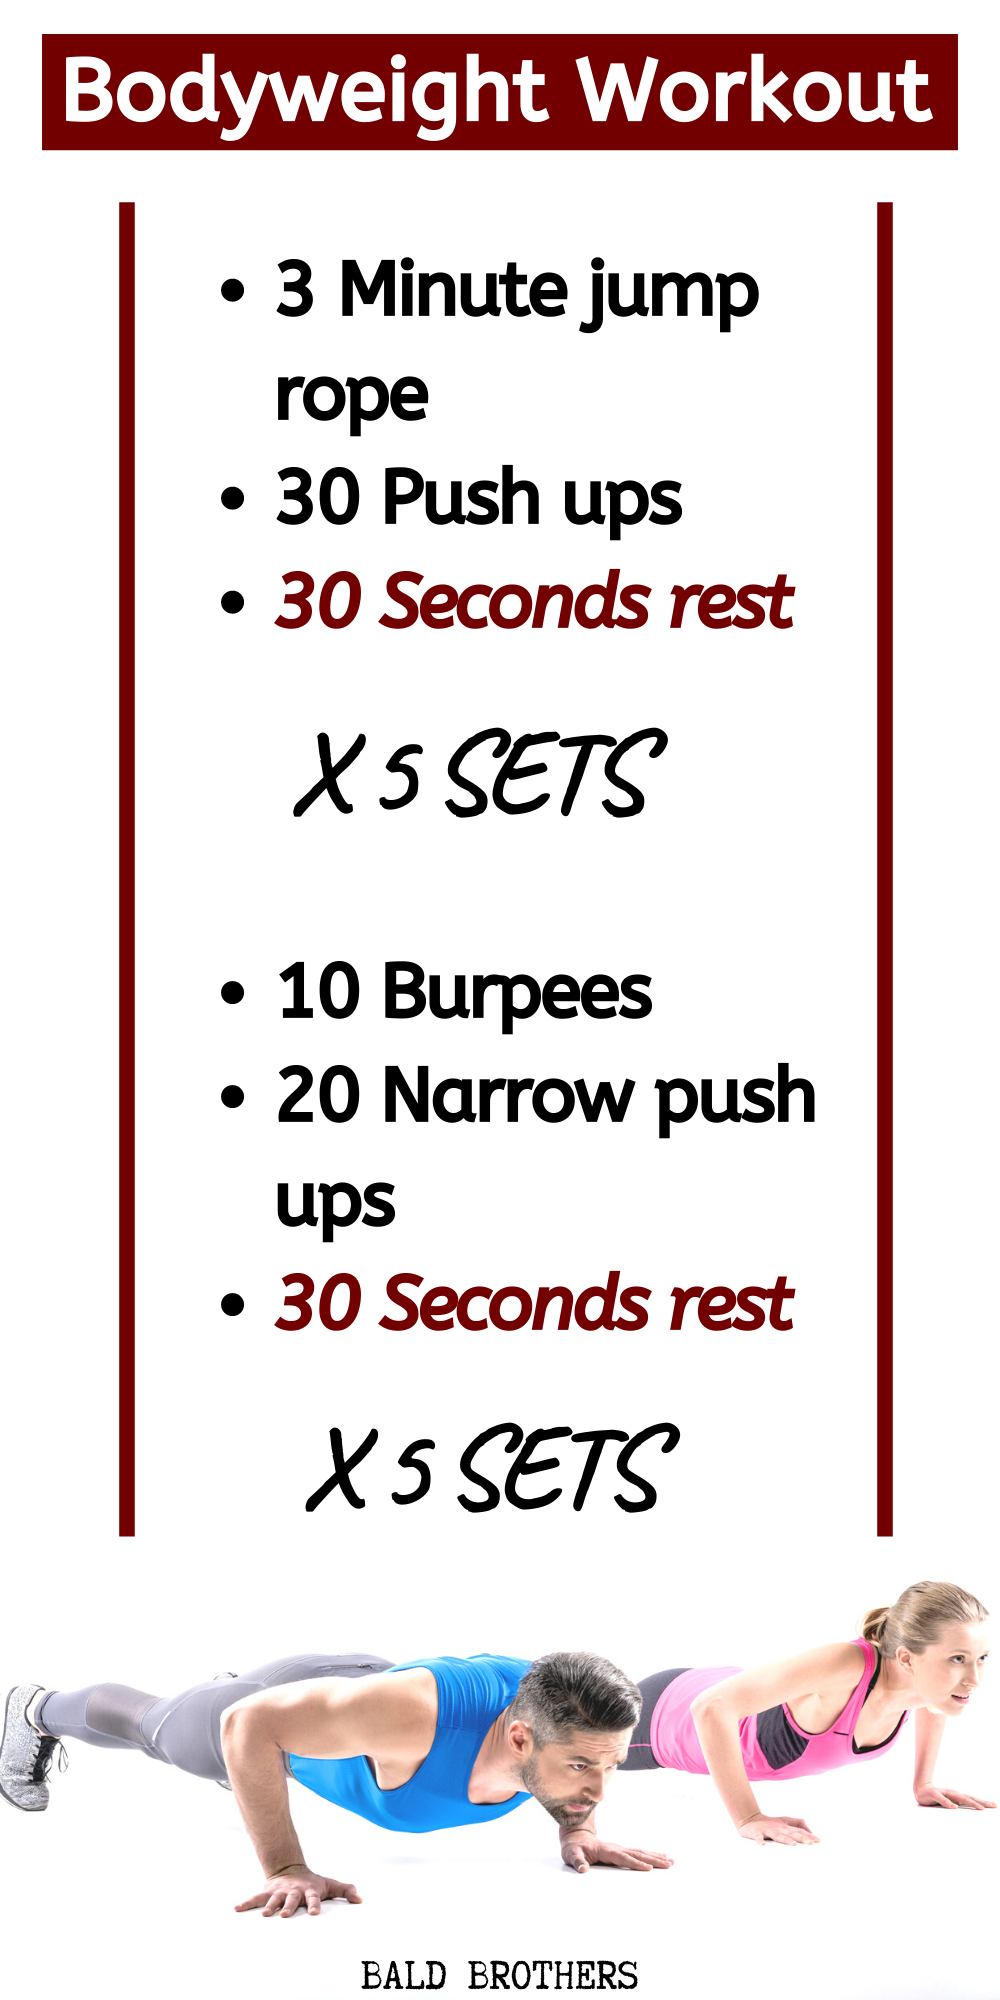 Try This Bodyweight Workout Routine To Get Fit And In Shape - Try This Bodyweight Workout Routine To Get Fit And In Shape -   17 fitness Routine for men ideas